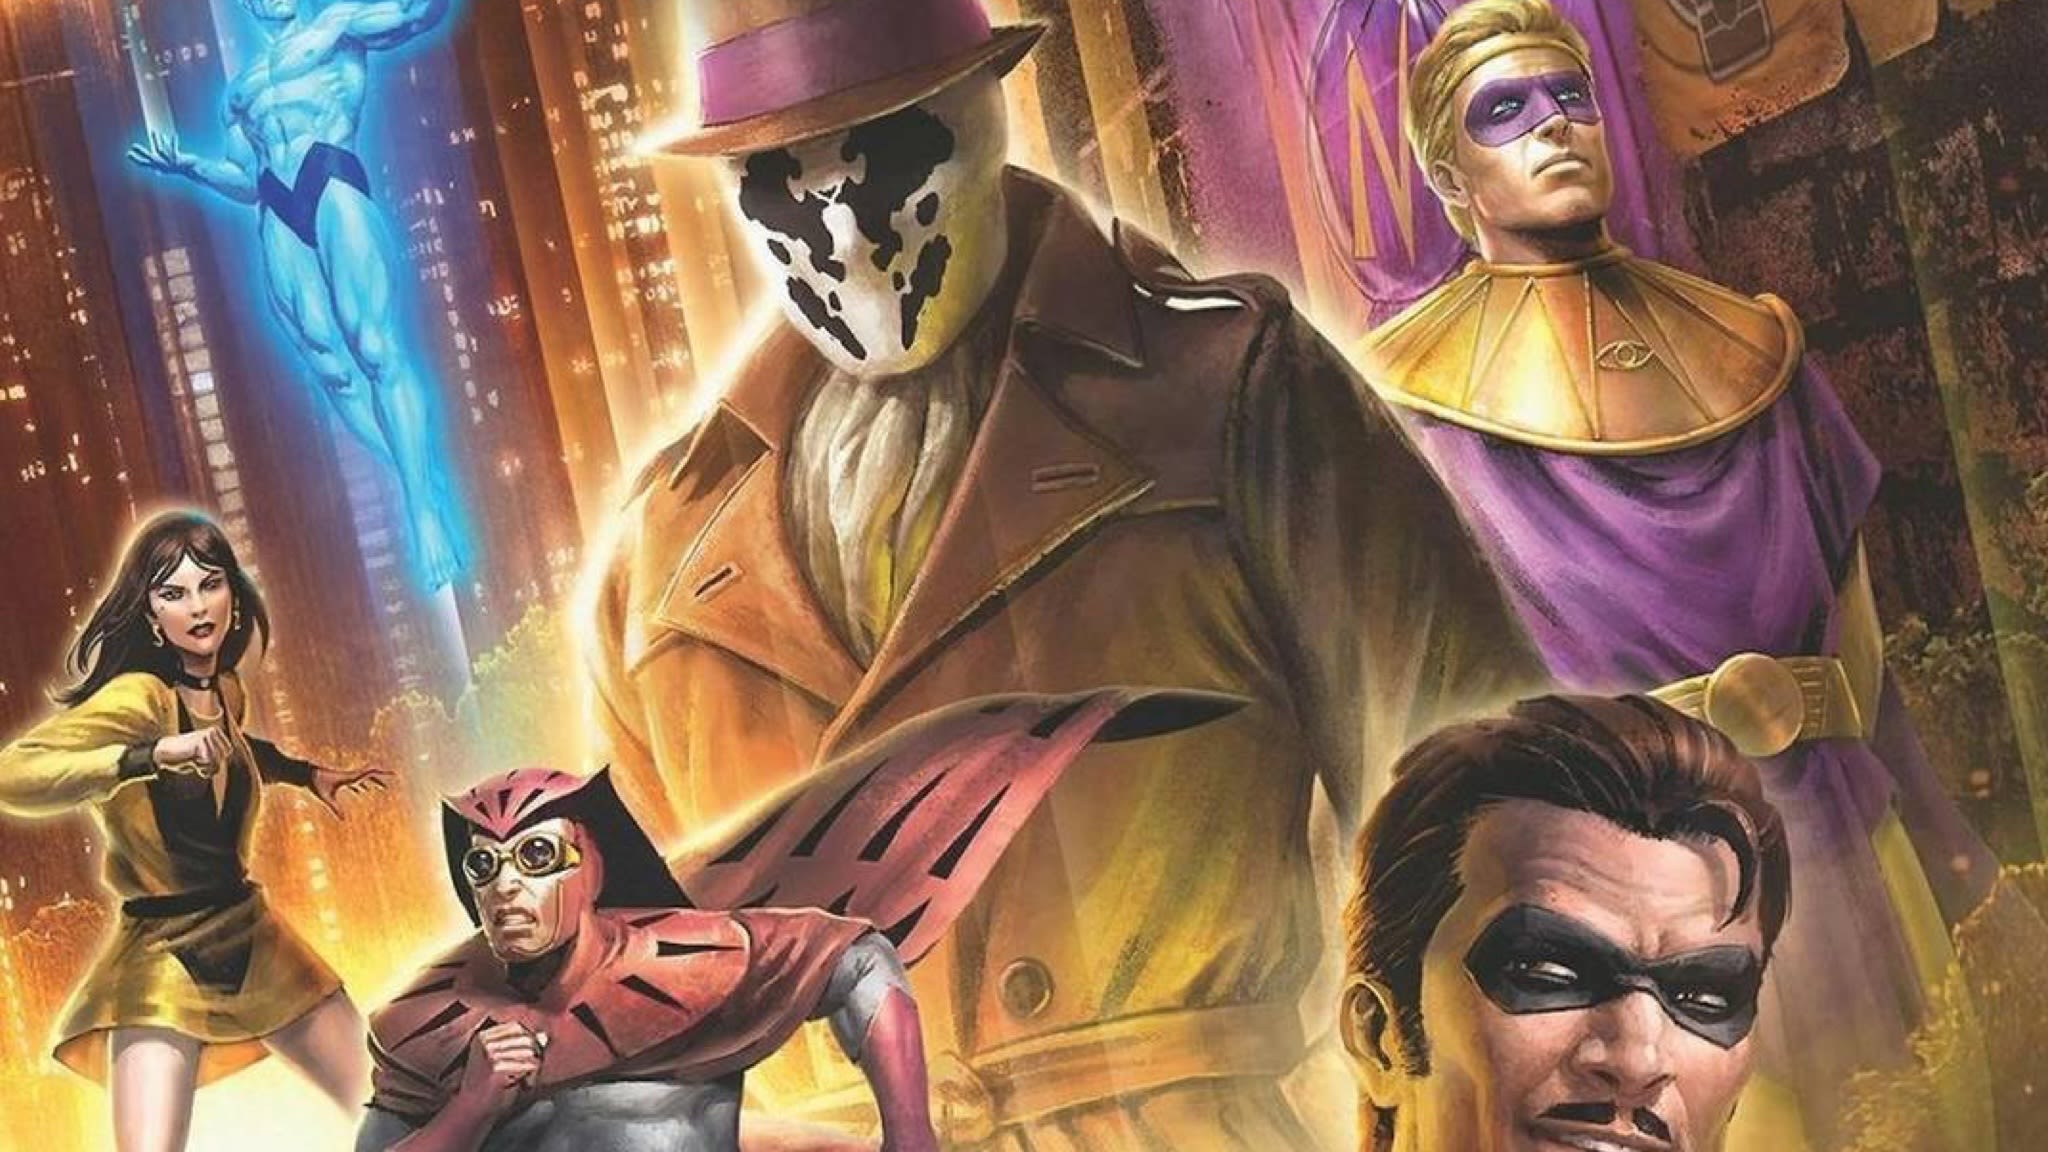 This new animated Watchmen movie trailer looks like the film the live-action version should have been